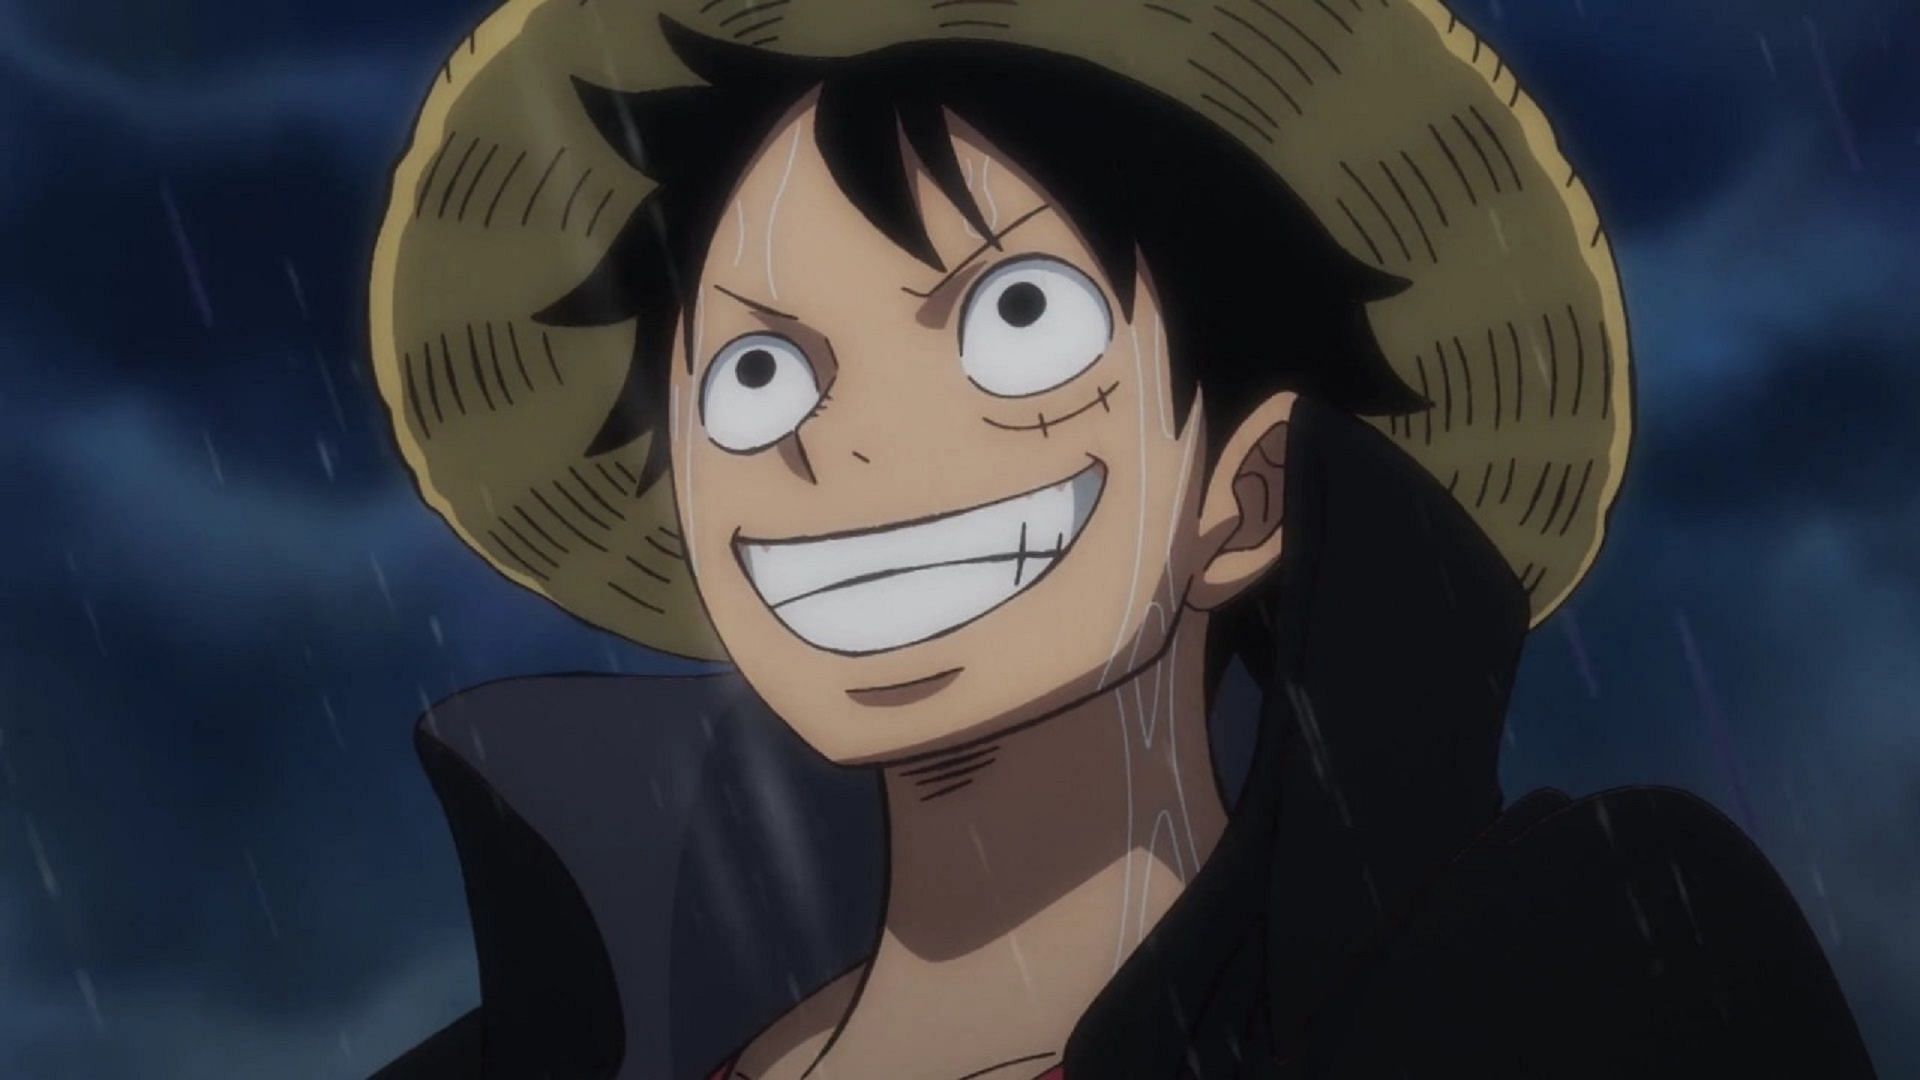 &quot;Strawhat&quot; Monkey D. Luffy, the founder and captain of the Strawhat Pirates (Image via Toei Animation, One Piece)